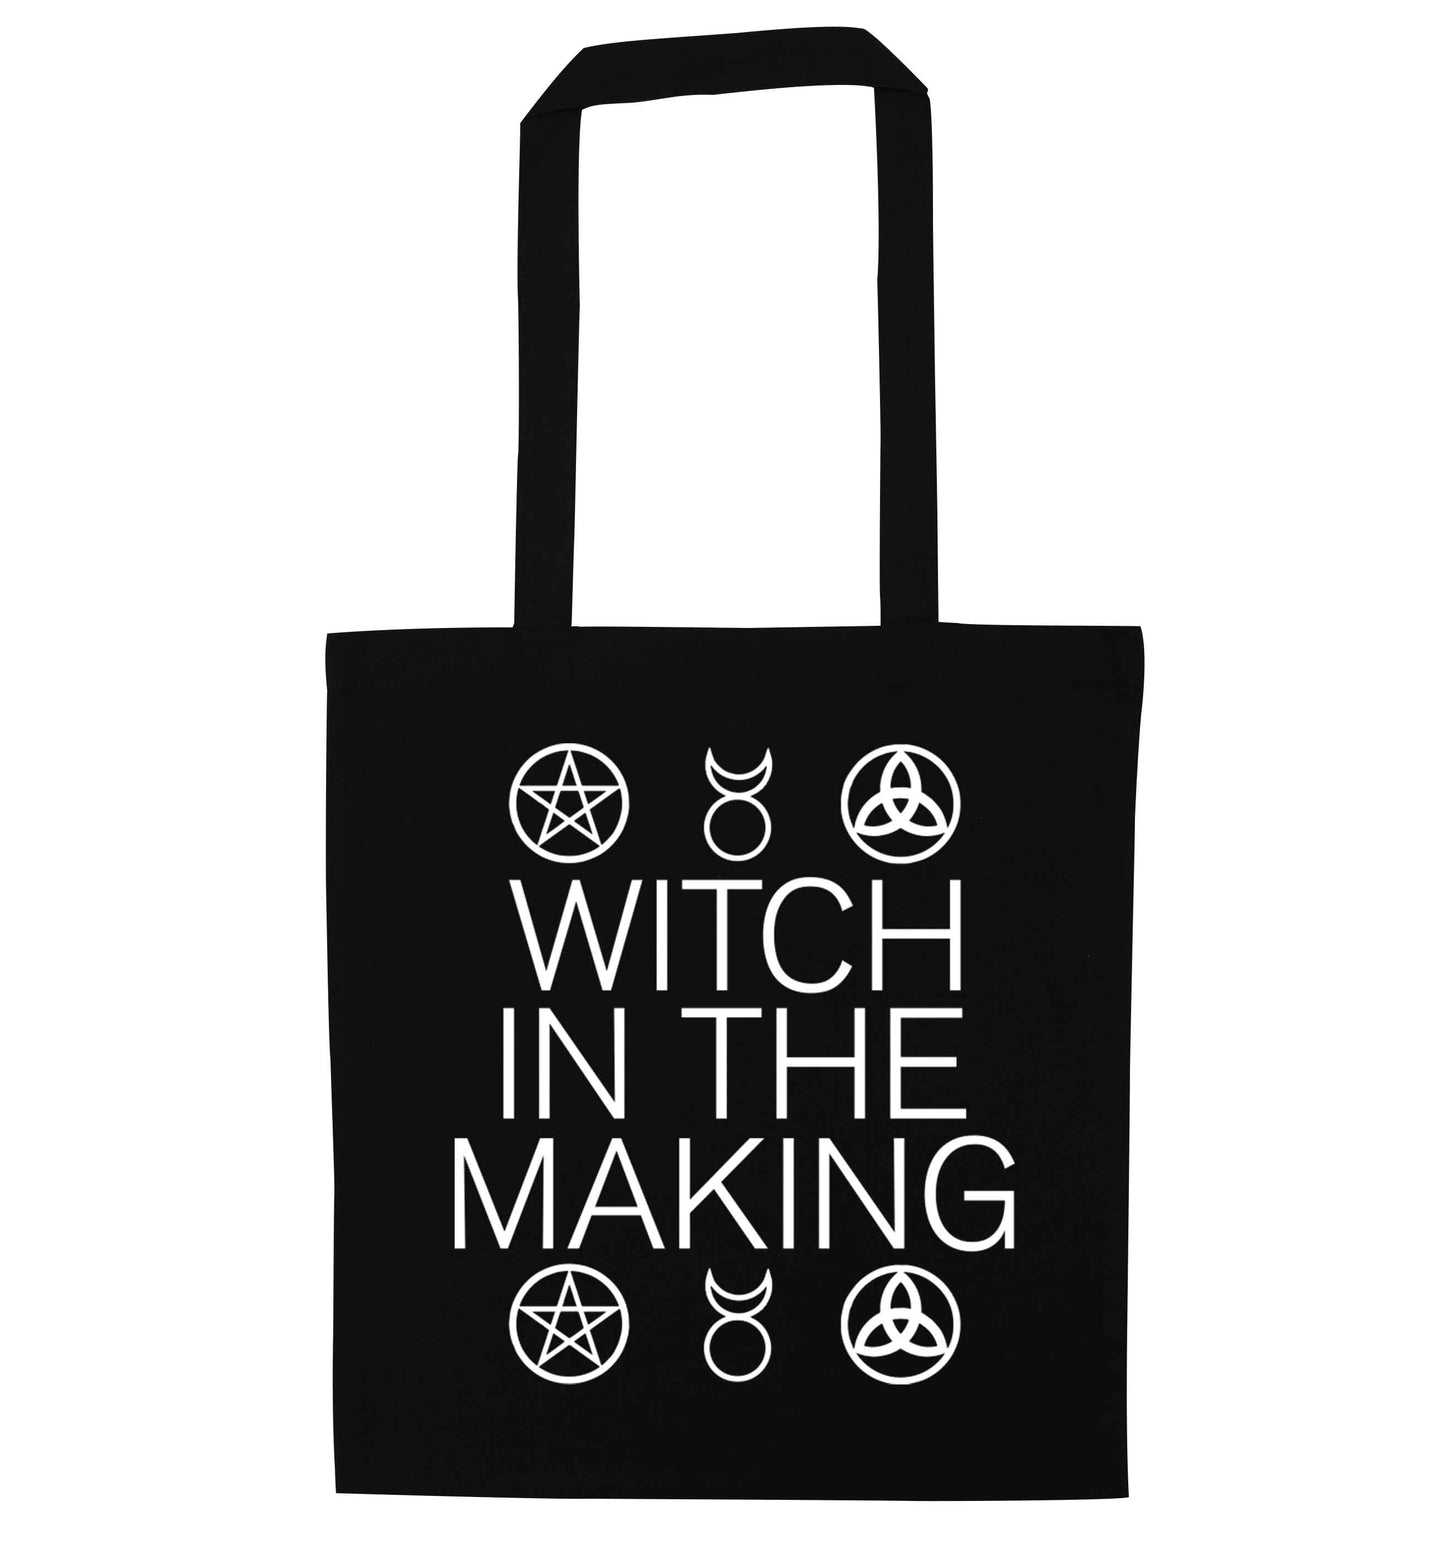 Witch in the making black tote bag